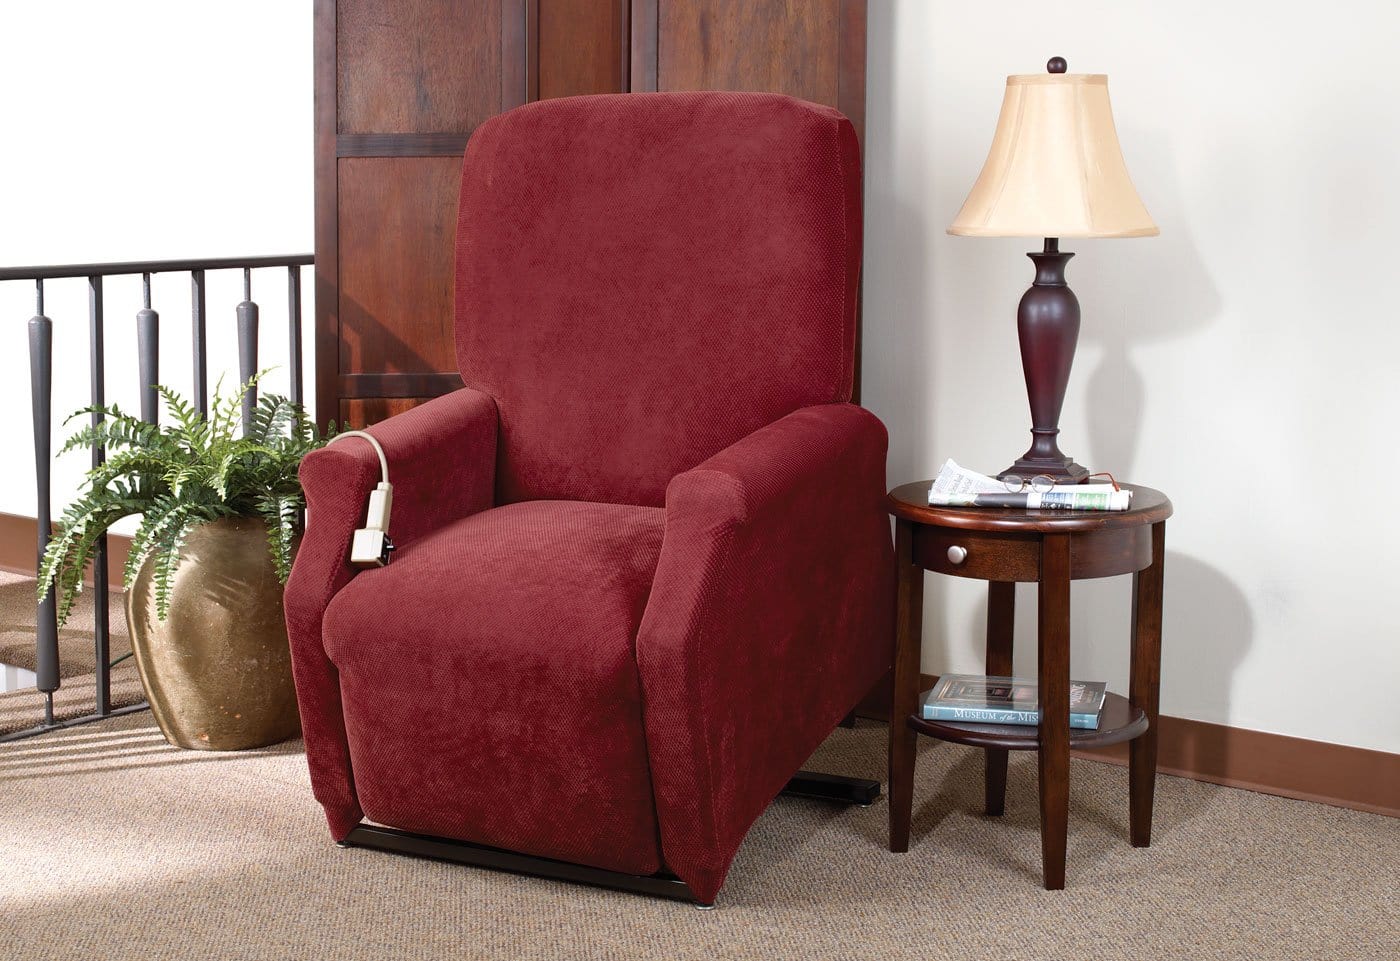 NEW Textured Pique Recliner Furniture Cover Chocolate 